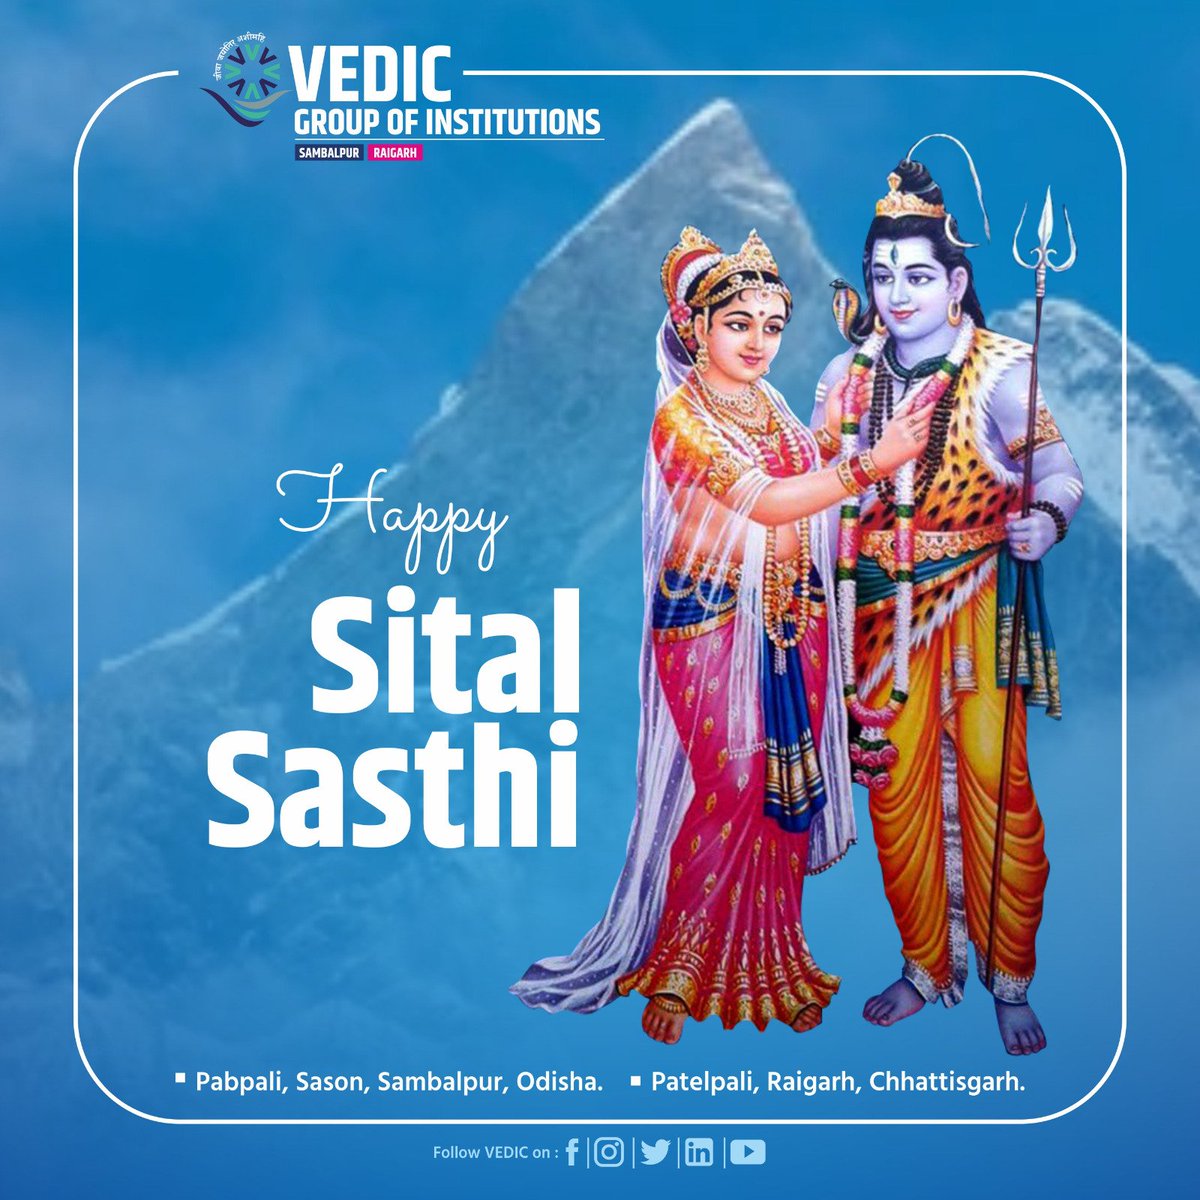 On this auspicious occasion of Sitala Sasthi, the Vedic Group Of Institutions extends warm greetings and best wishes to everyone. 

May the divine blessings of Lord Shiva and Goddess Parvati fill your lives with peace, happiness, and prosperity!

#HappyShitalSasthi #HinduFestival